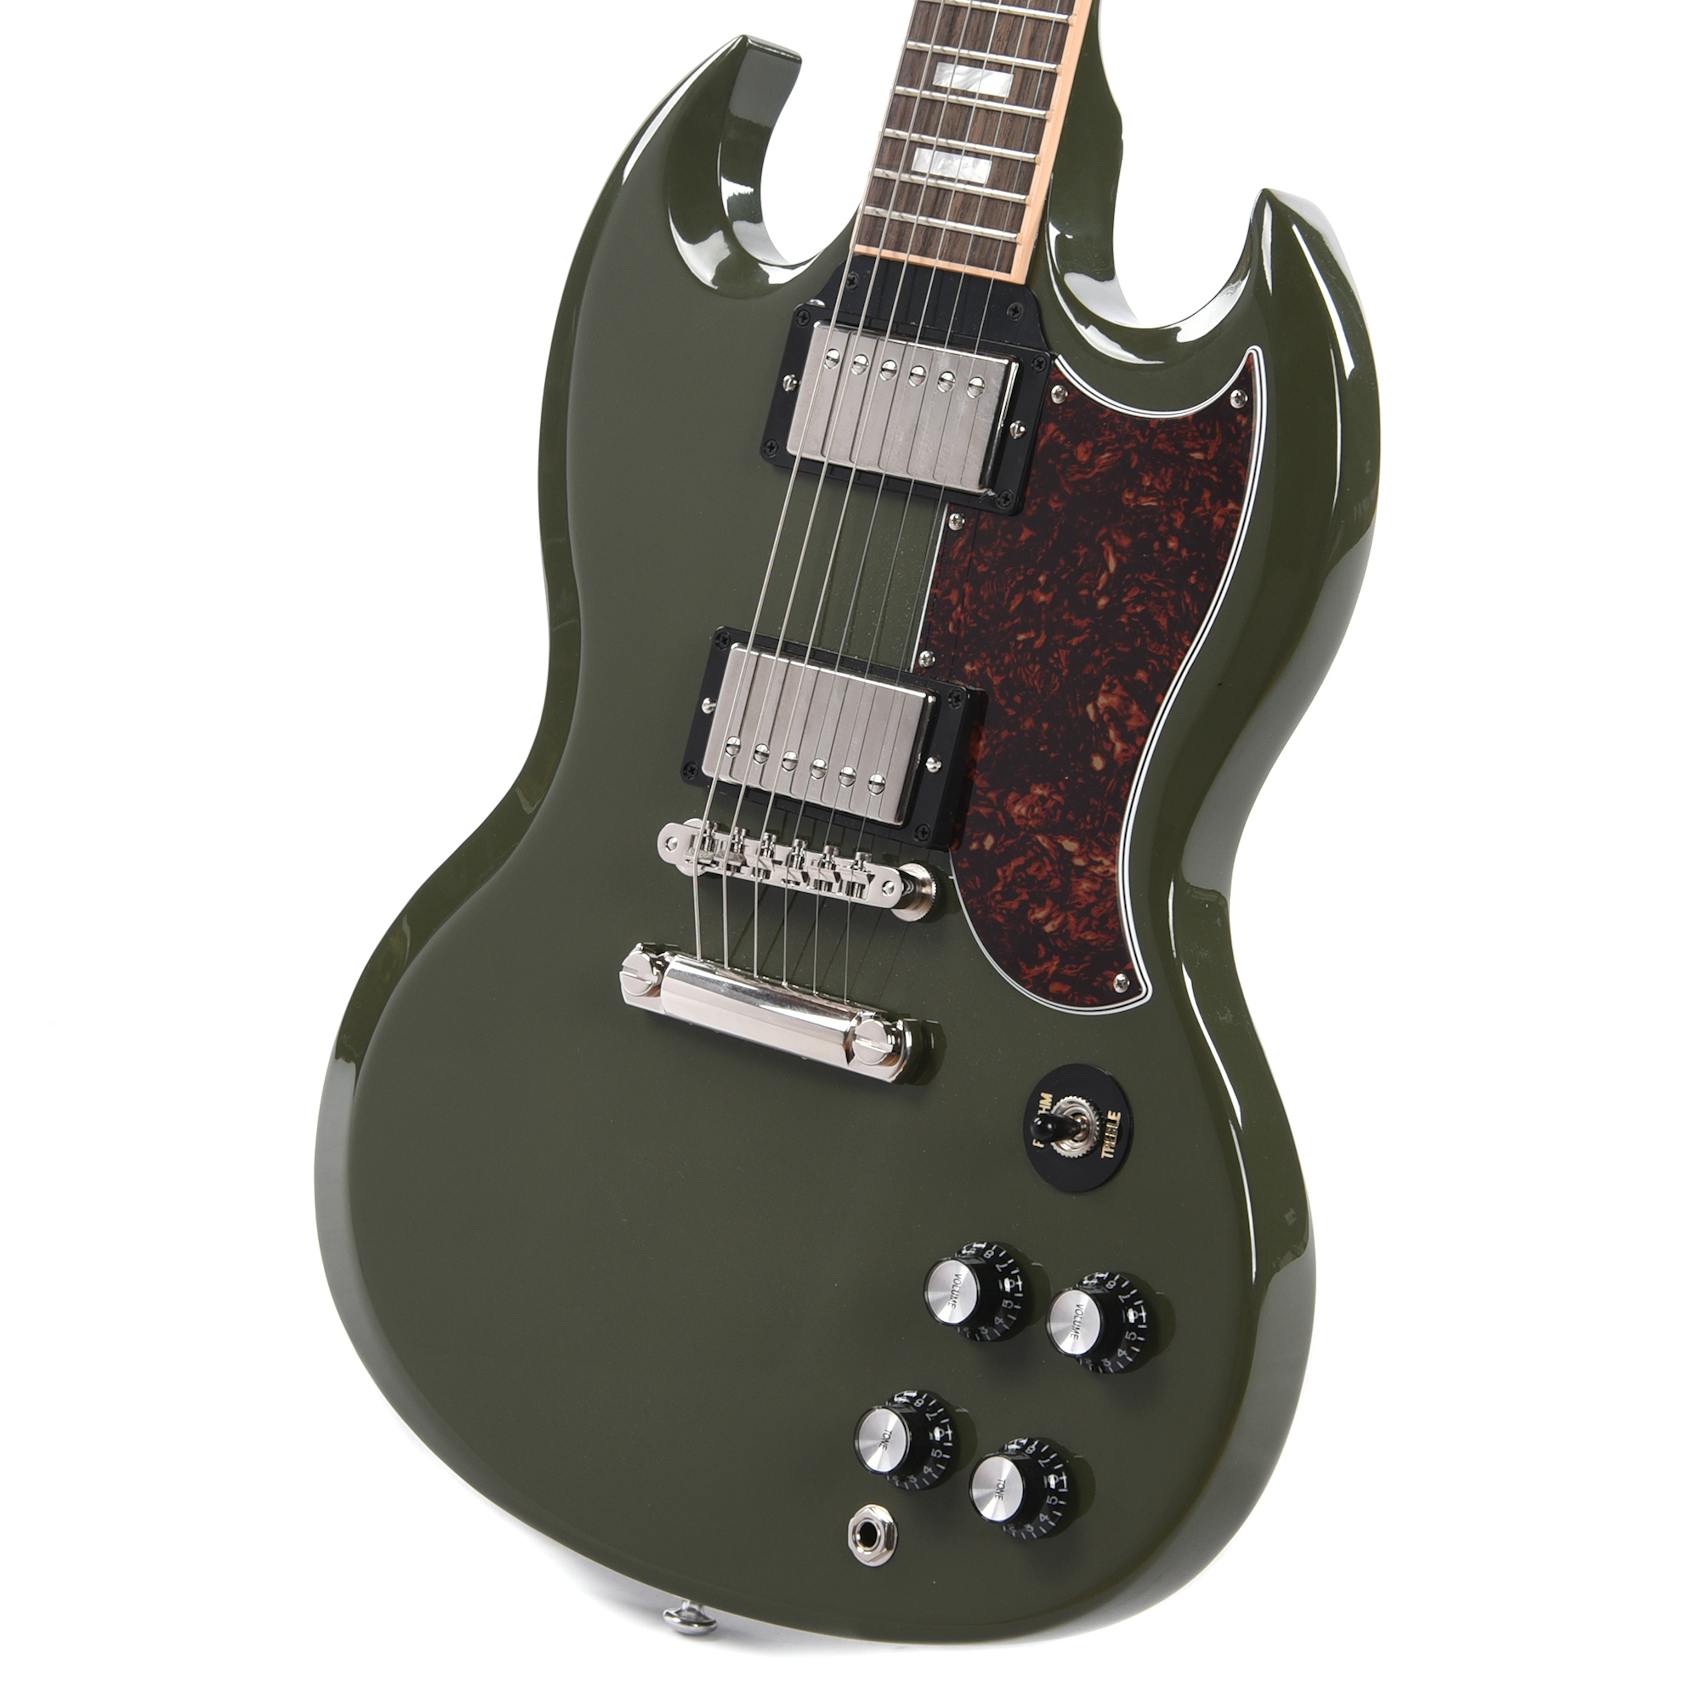 392599-Gibson-SG-Standard-Limited-Edition-Olive-Drab-Green-T-Type-Pickups-5.jpg